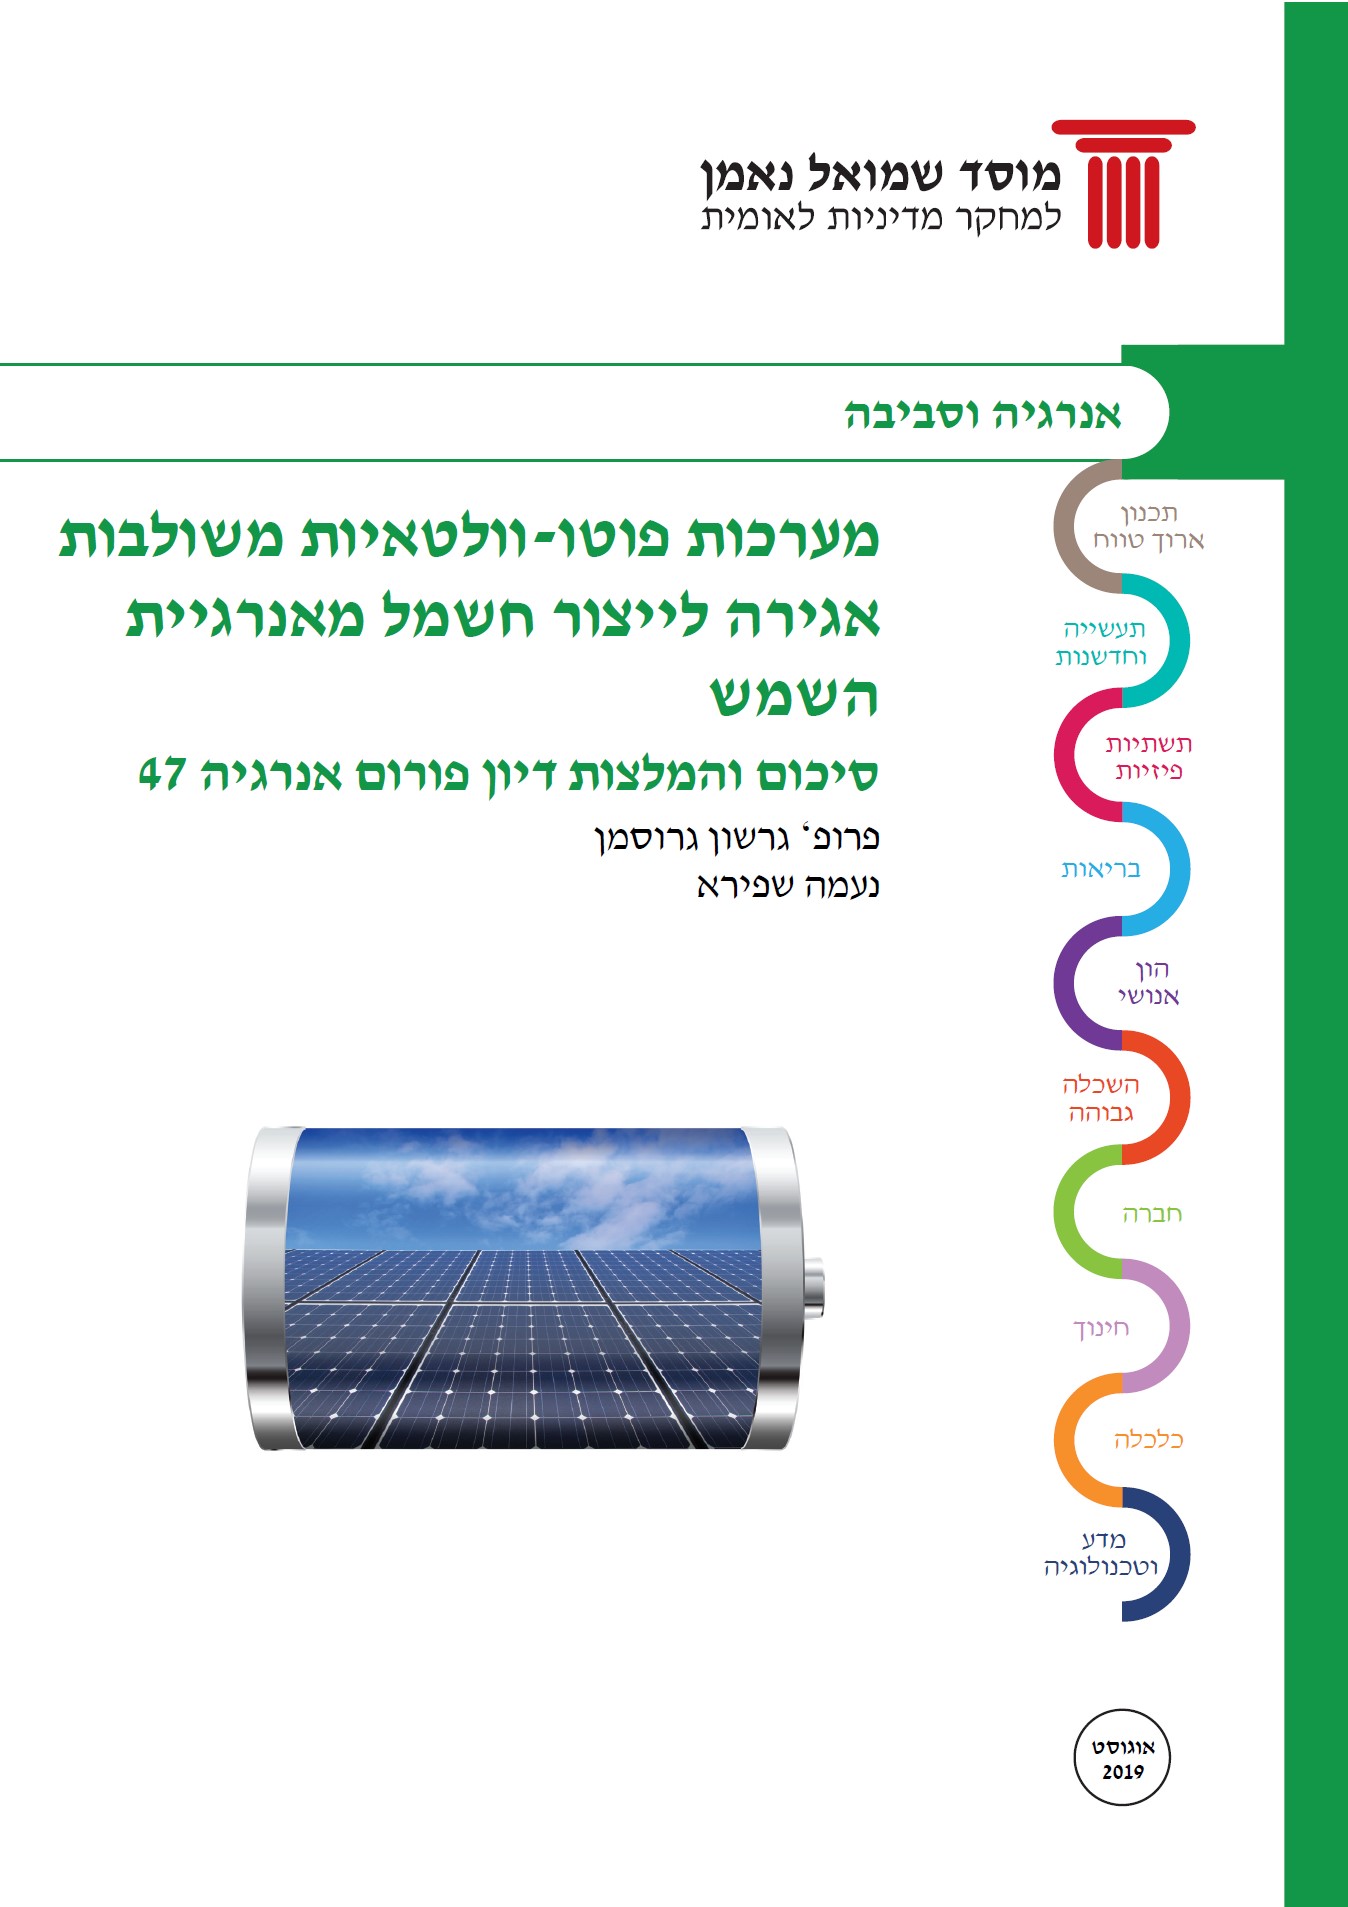 Energy Forum 47: Combined Photovoltaic and Storage Systems to Produce Electricity From Solar Energy